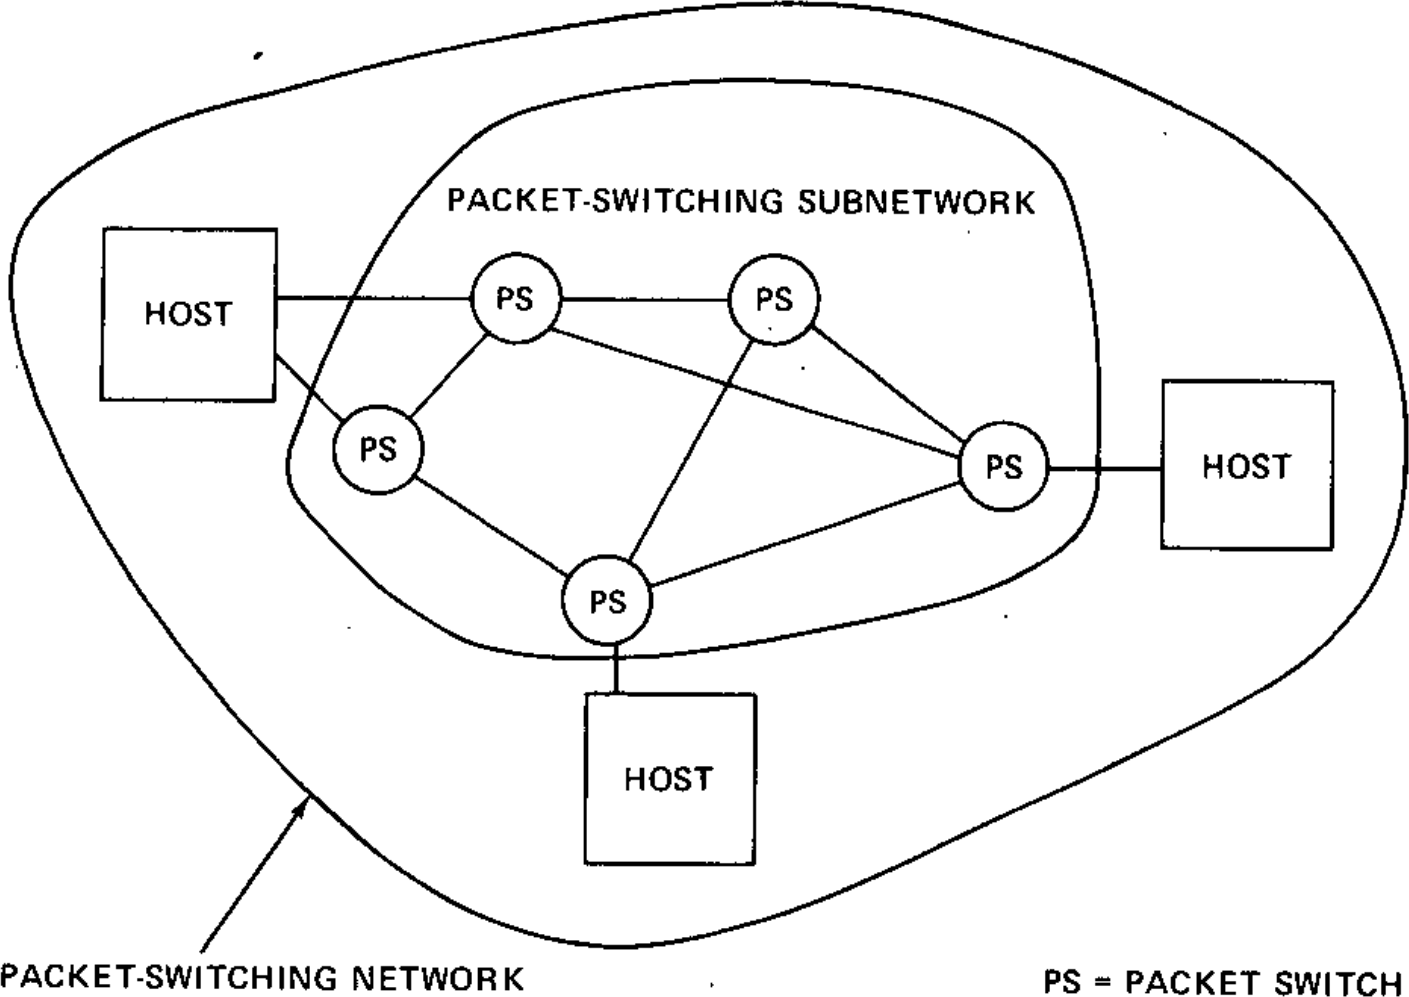 The core of TCP/IP is routing bundles of data called “packets.”